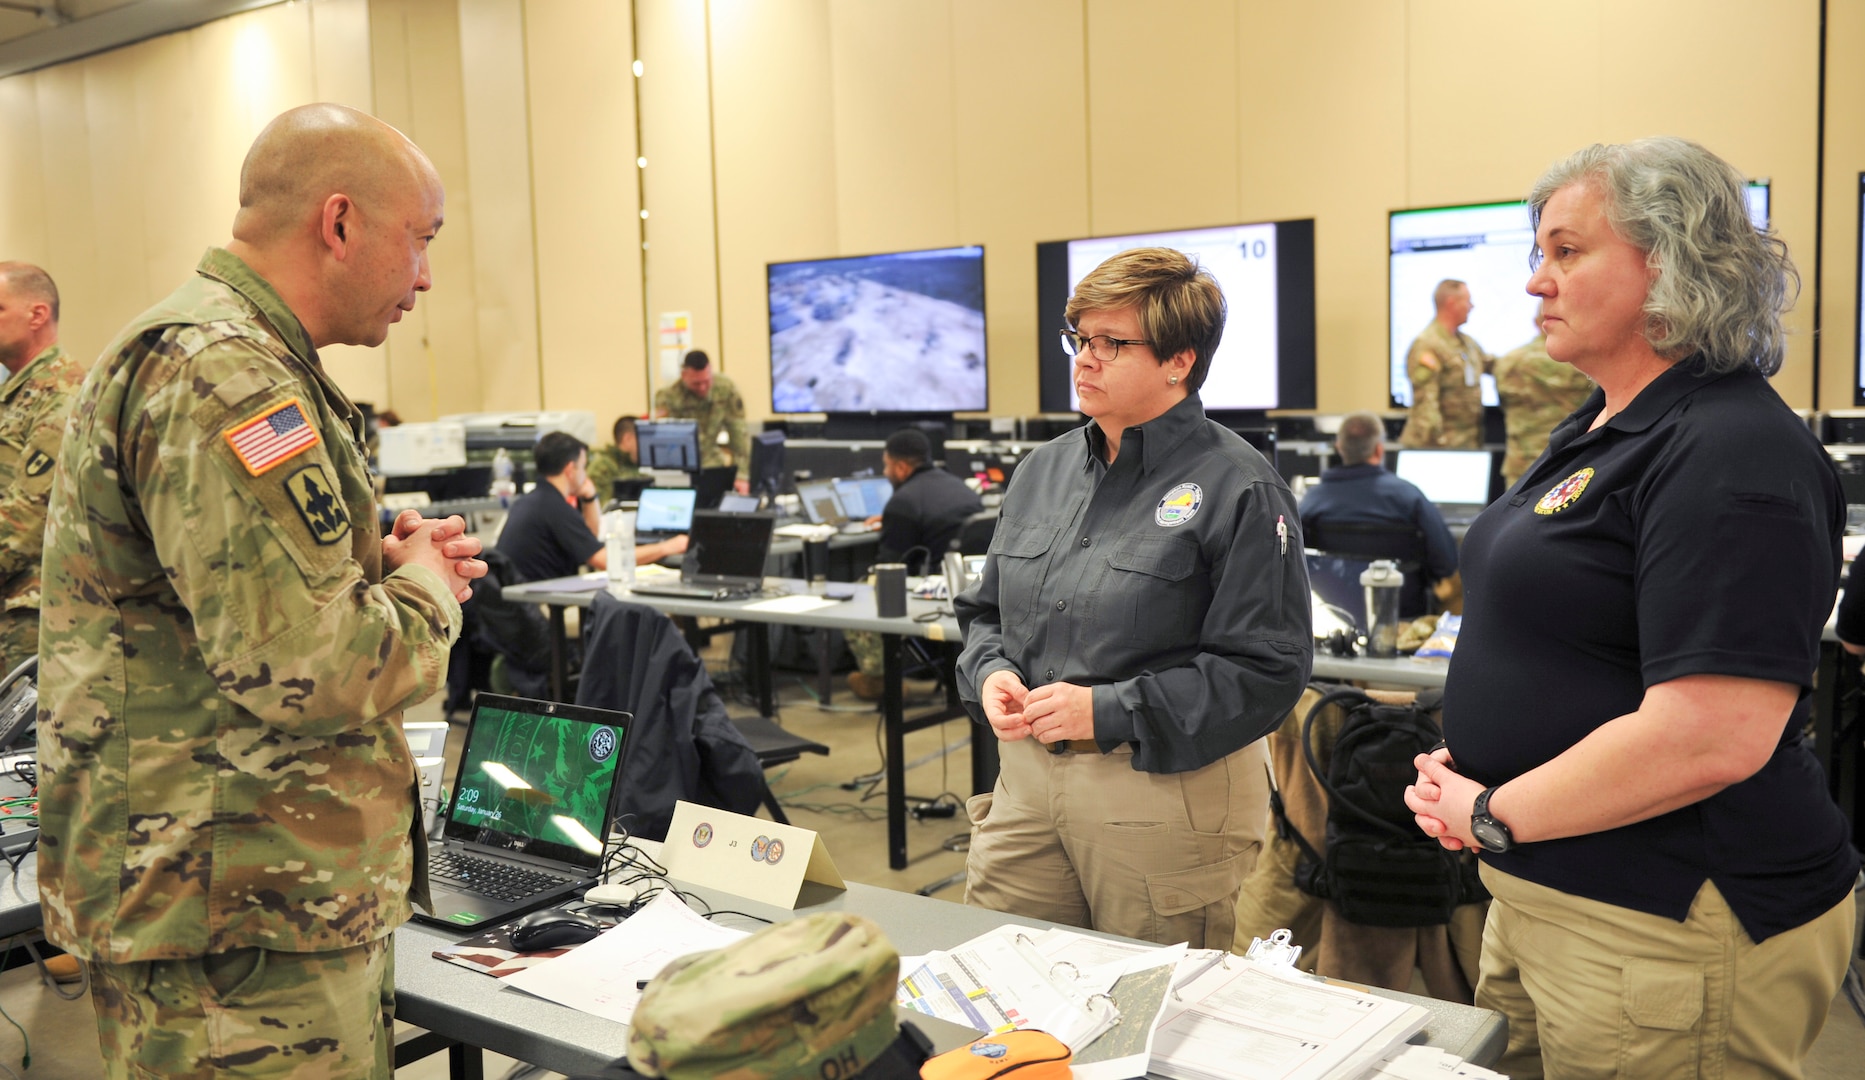 U.S. Army Col. Eric Oh (left), Joint Task Force Civil Support (JTF-CS) director of operations, speaks with Erin Sutton (middle), City of Virginia Beach emergency manager, and Carolyn Holmes (right), JTF-CS interagency planner, during Exercise Sudden Response 19 in Fayetteville, N.C., Jan. 26. The weeklong exercise is a critical training component for JTF-CS and its training partners. The unit is a standing joint task force tasked to respond to a catastrophic chemical, biological, radiological, or nuclear (CBRN) event in the U.S. (Official DoD photo by Staff Sgt. Jeramy Moore/released)